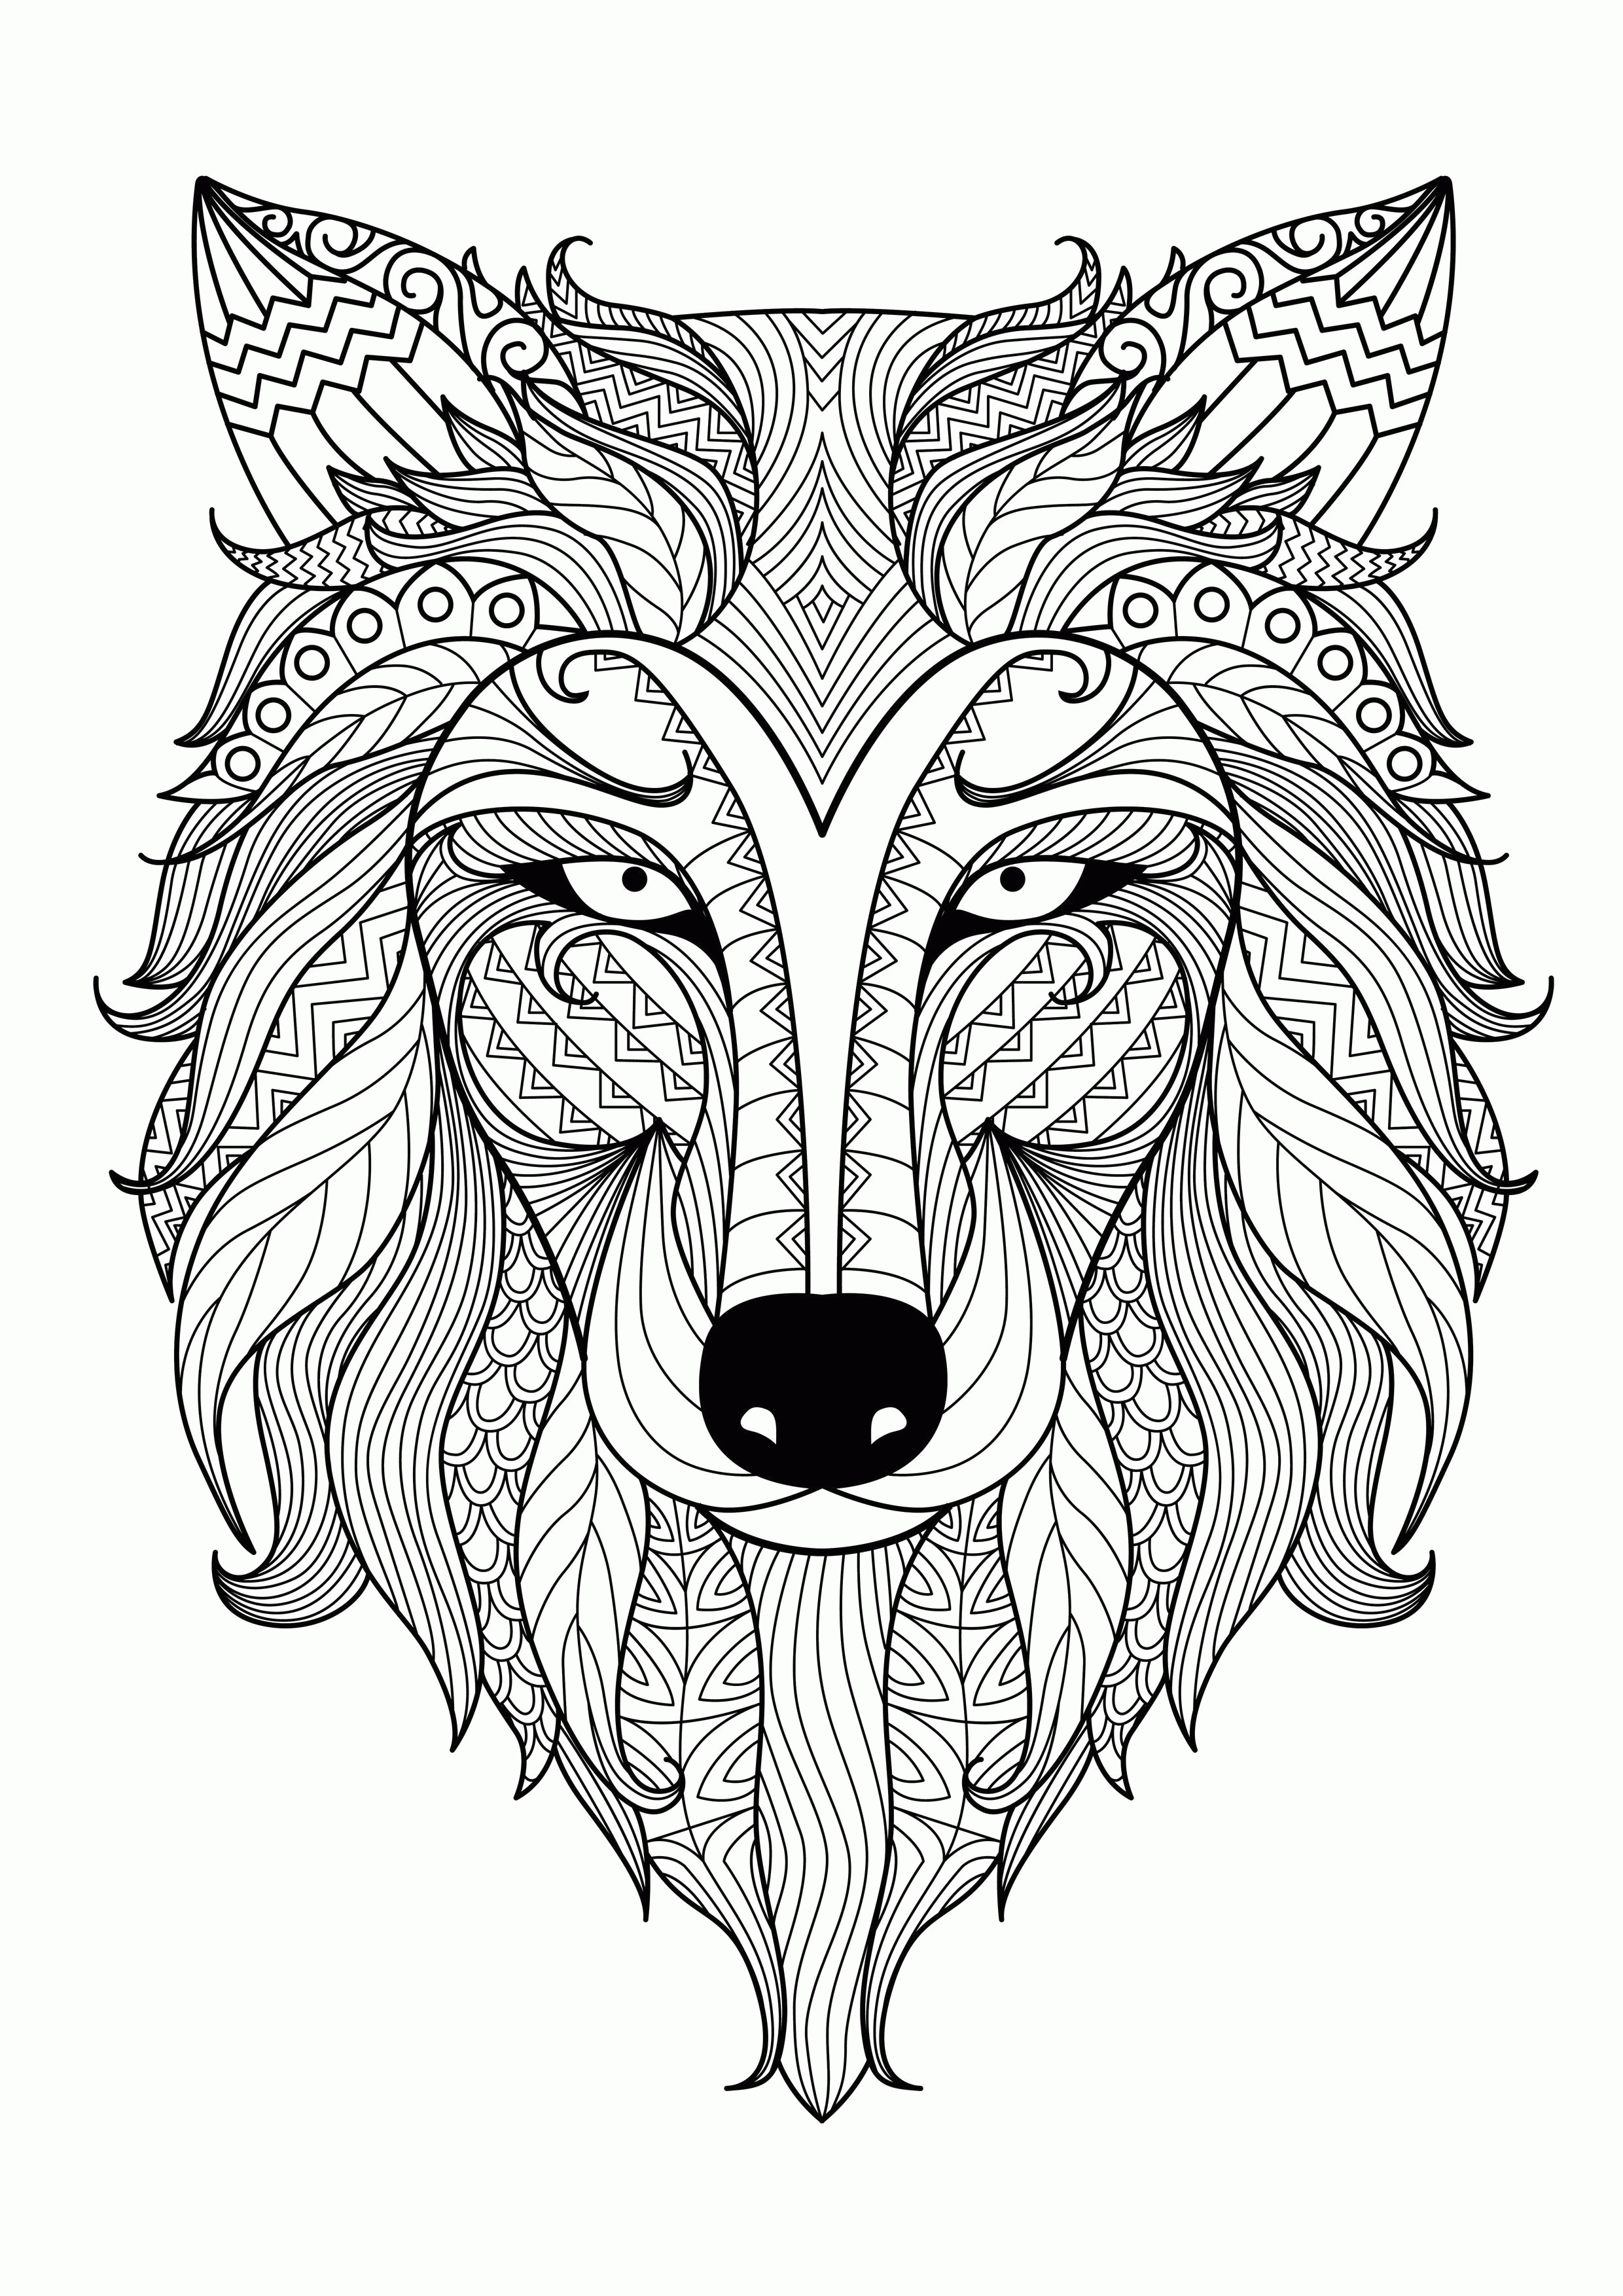 Free Animal Mandalas Coloring Pages, Download Free Animal Mandalas Coloring  Pages png images, Free ClipArts on Clipart Library